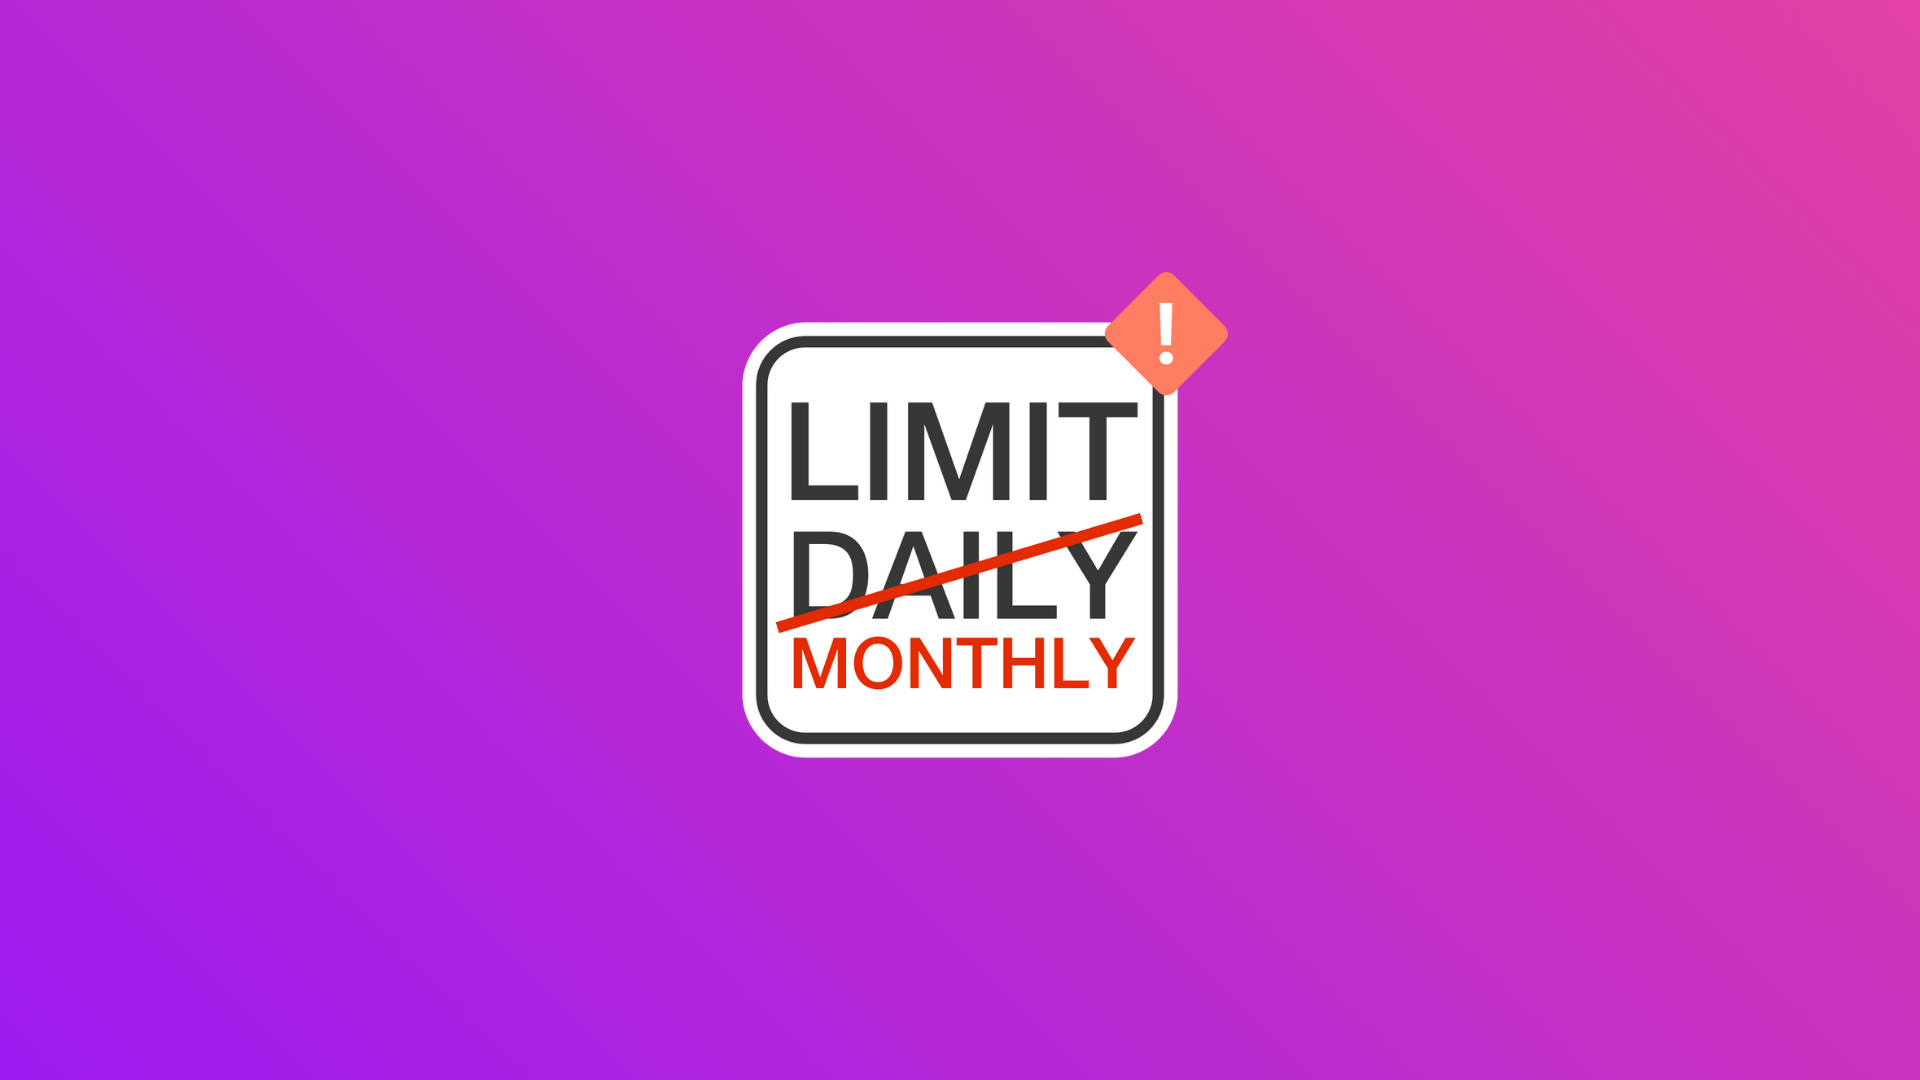 Street sign with text "Limit monthly" striked through and corrected to "daily"